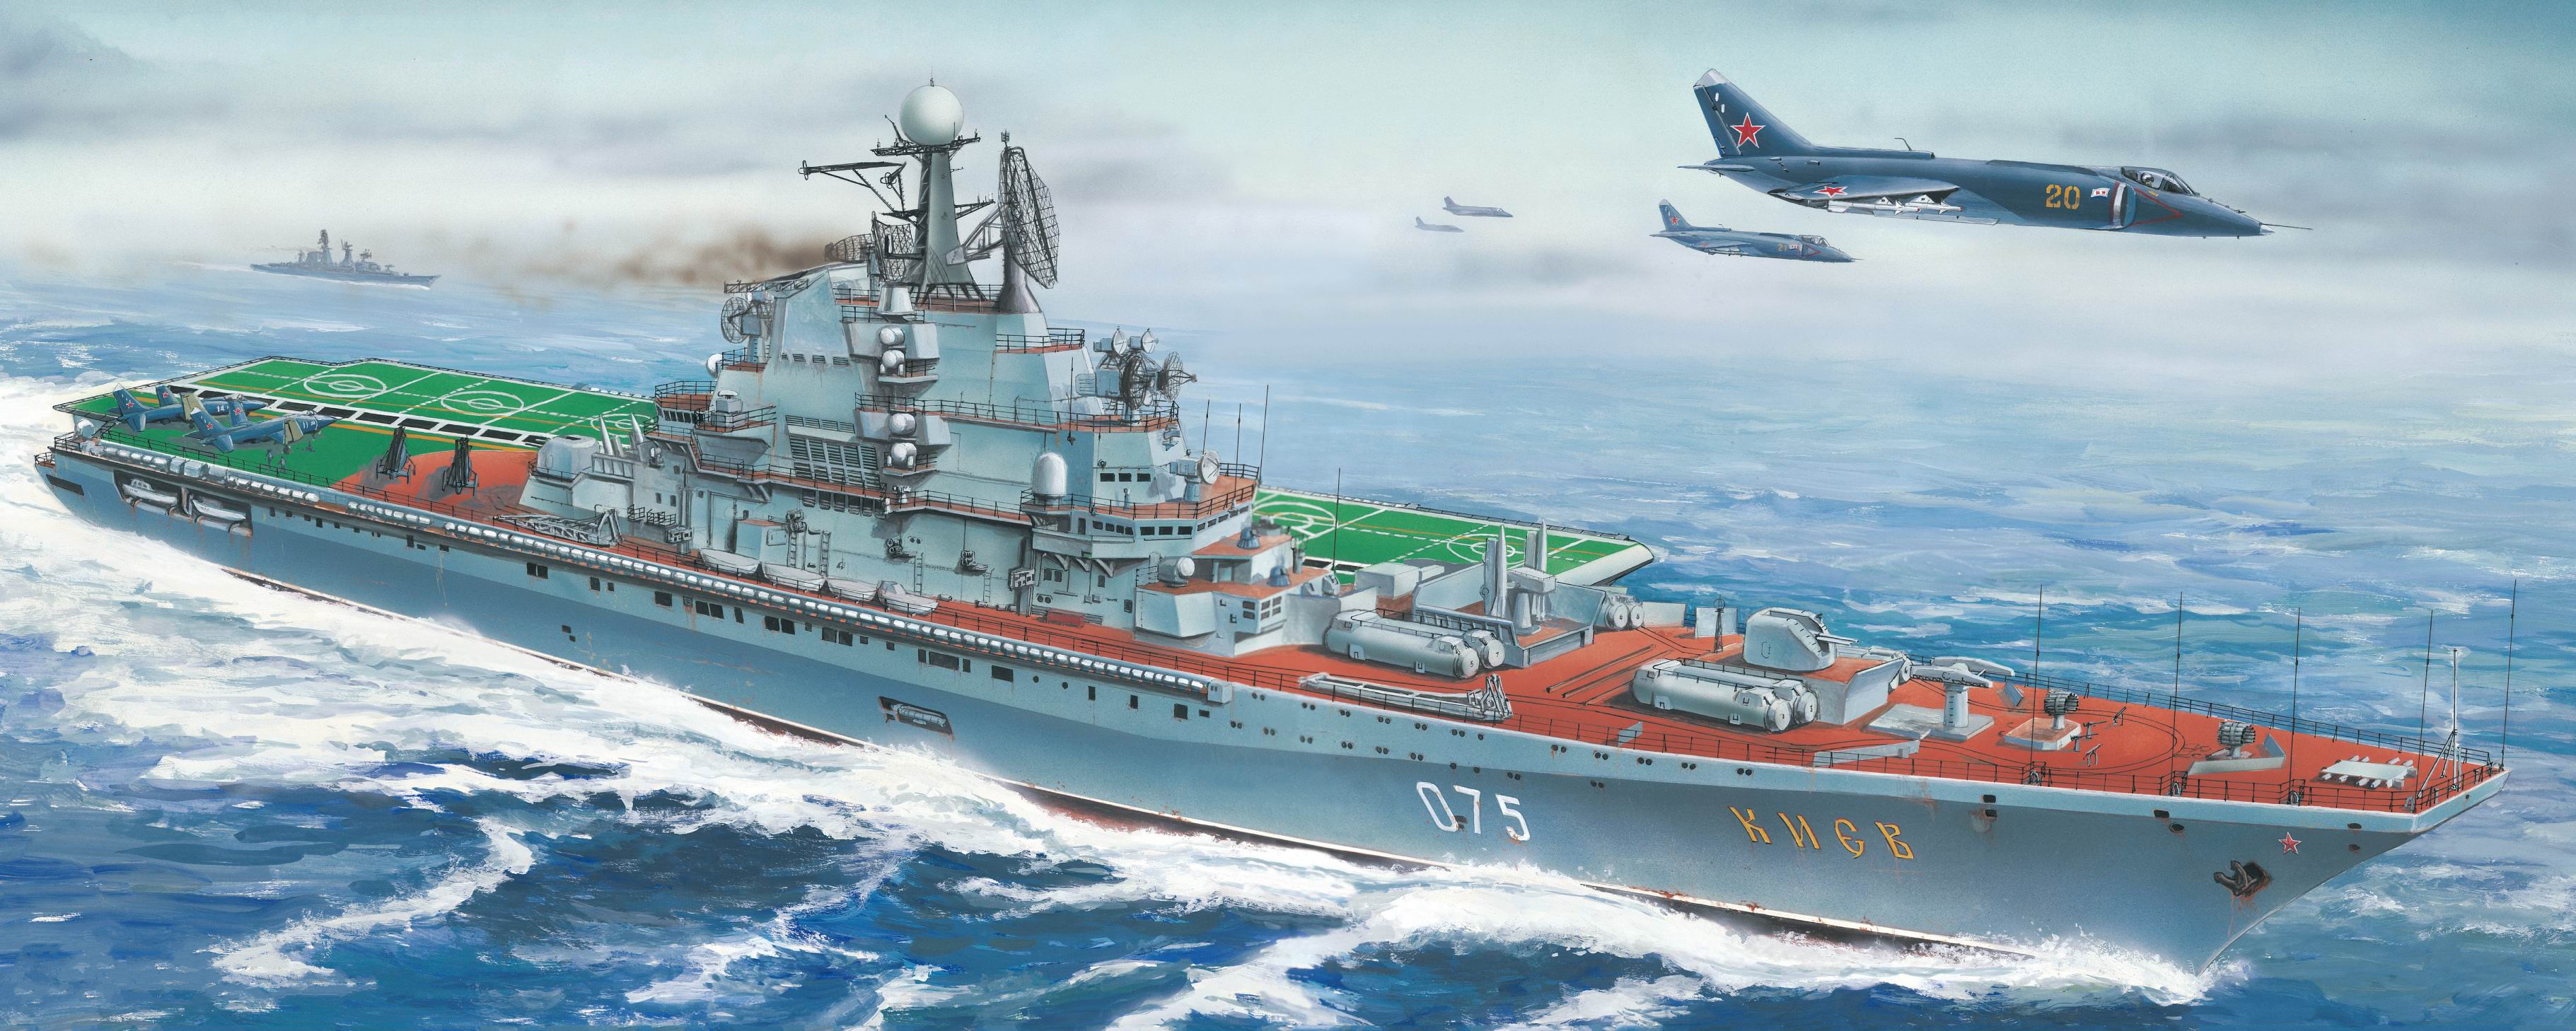 Warship Aircraft Military Sea Sky Army Army Gear Aircraft Carrier Russian Navy 3642x1458